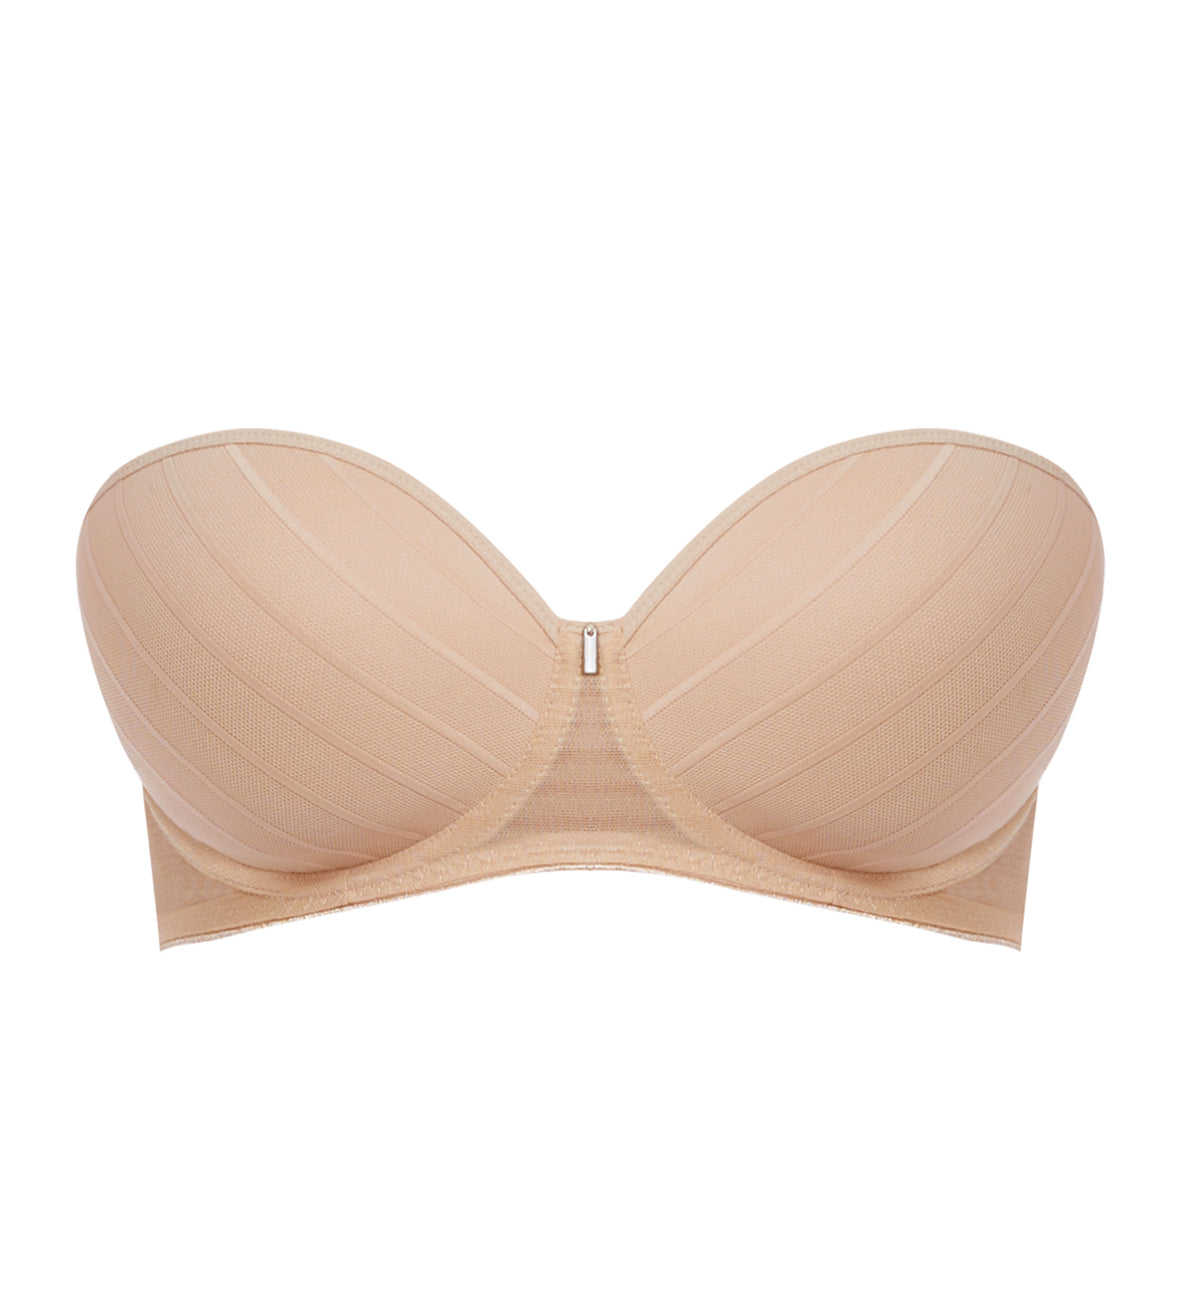 Freya Cameo Deco Strapless Moulded Underwire Bra (3163),28D,Sand - Sand,28D